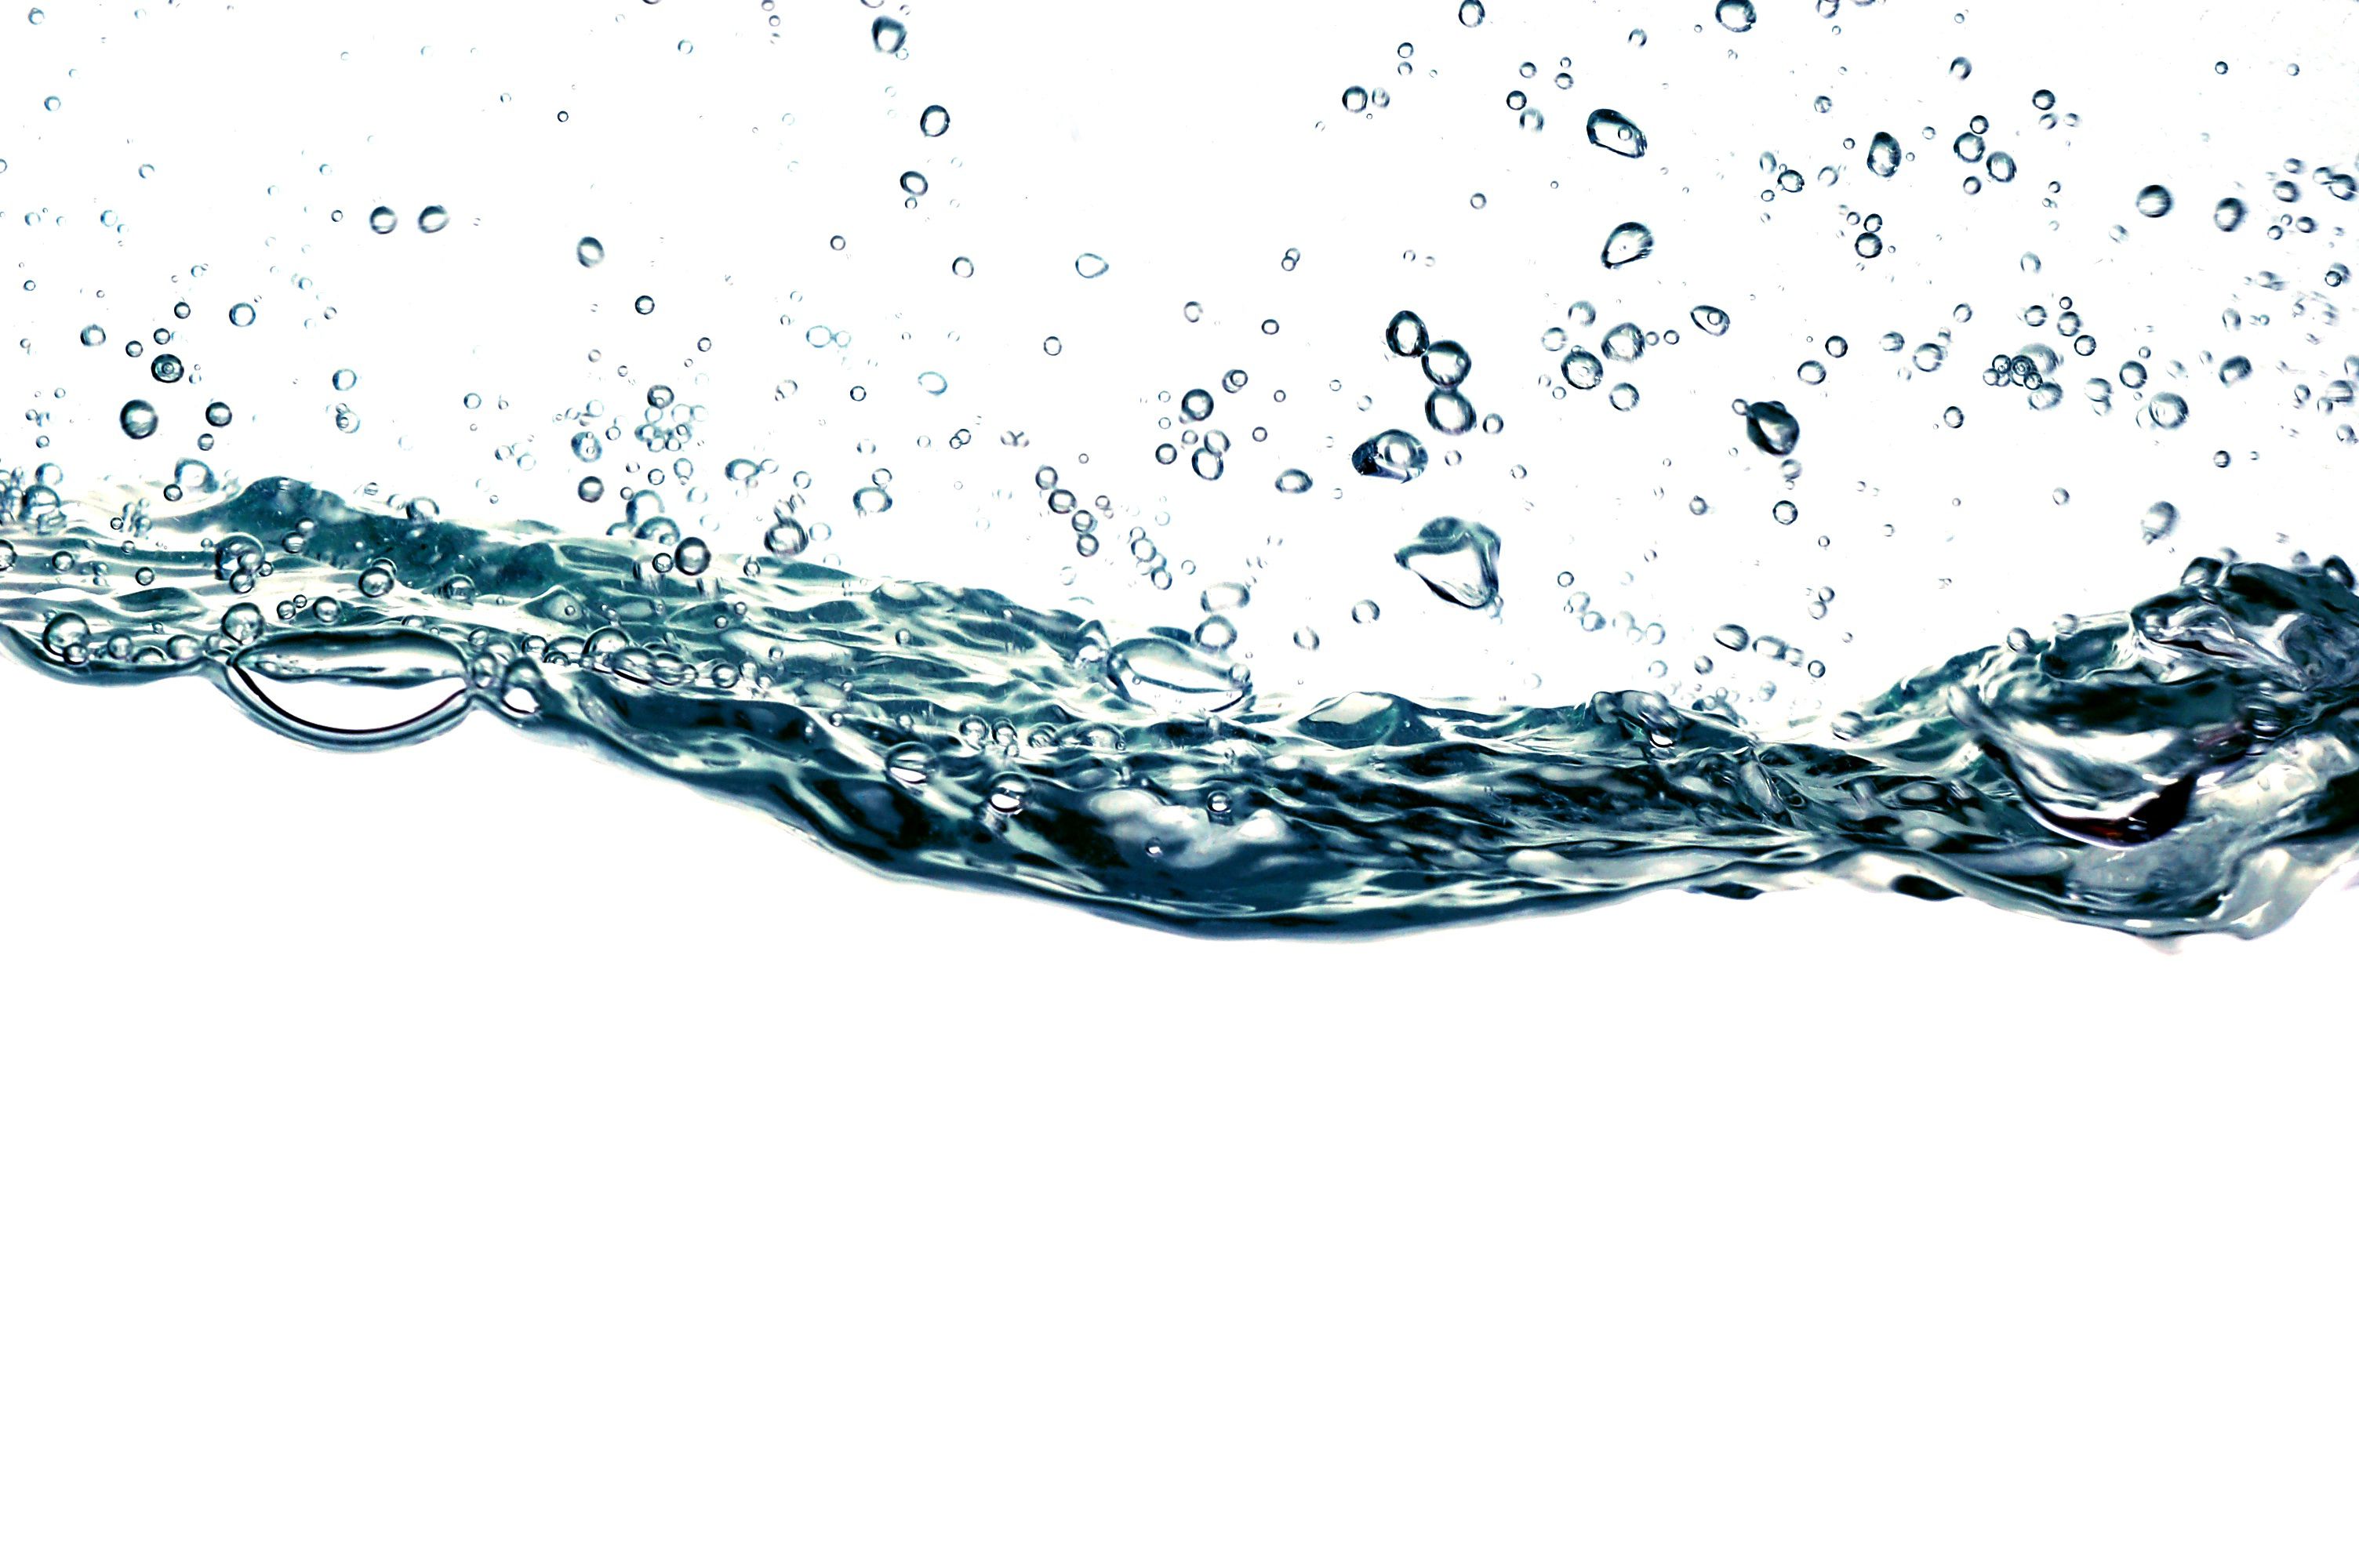 Water Stocks: Don't Overlook This $1 Trillion Opportunity